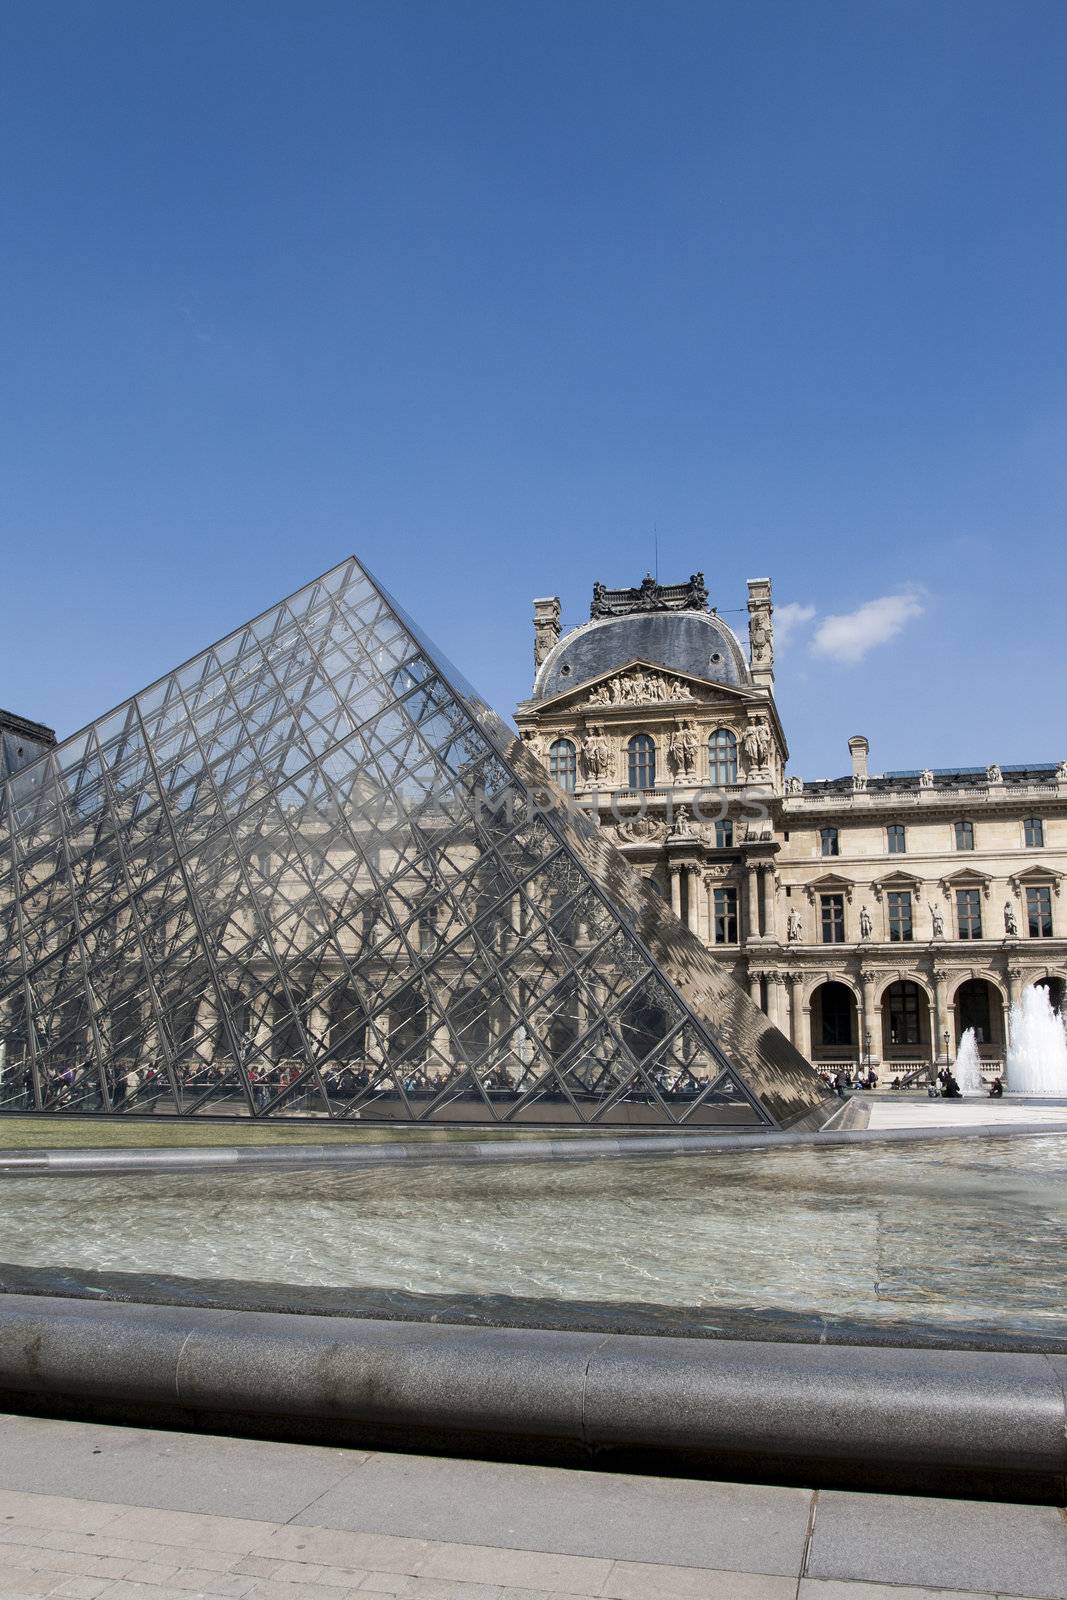 Glass Pyramid at the Louvre Museum by ints